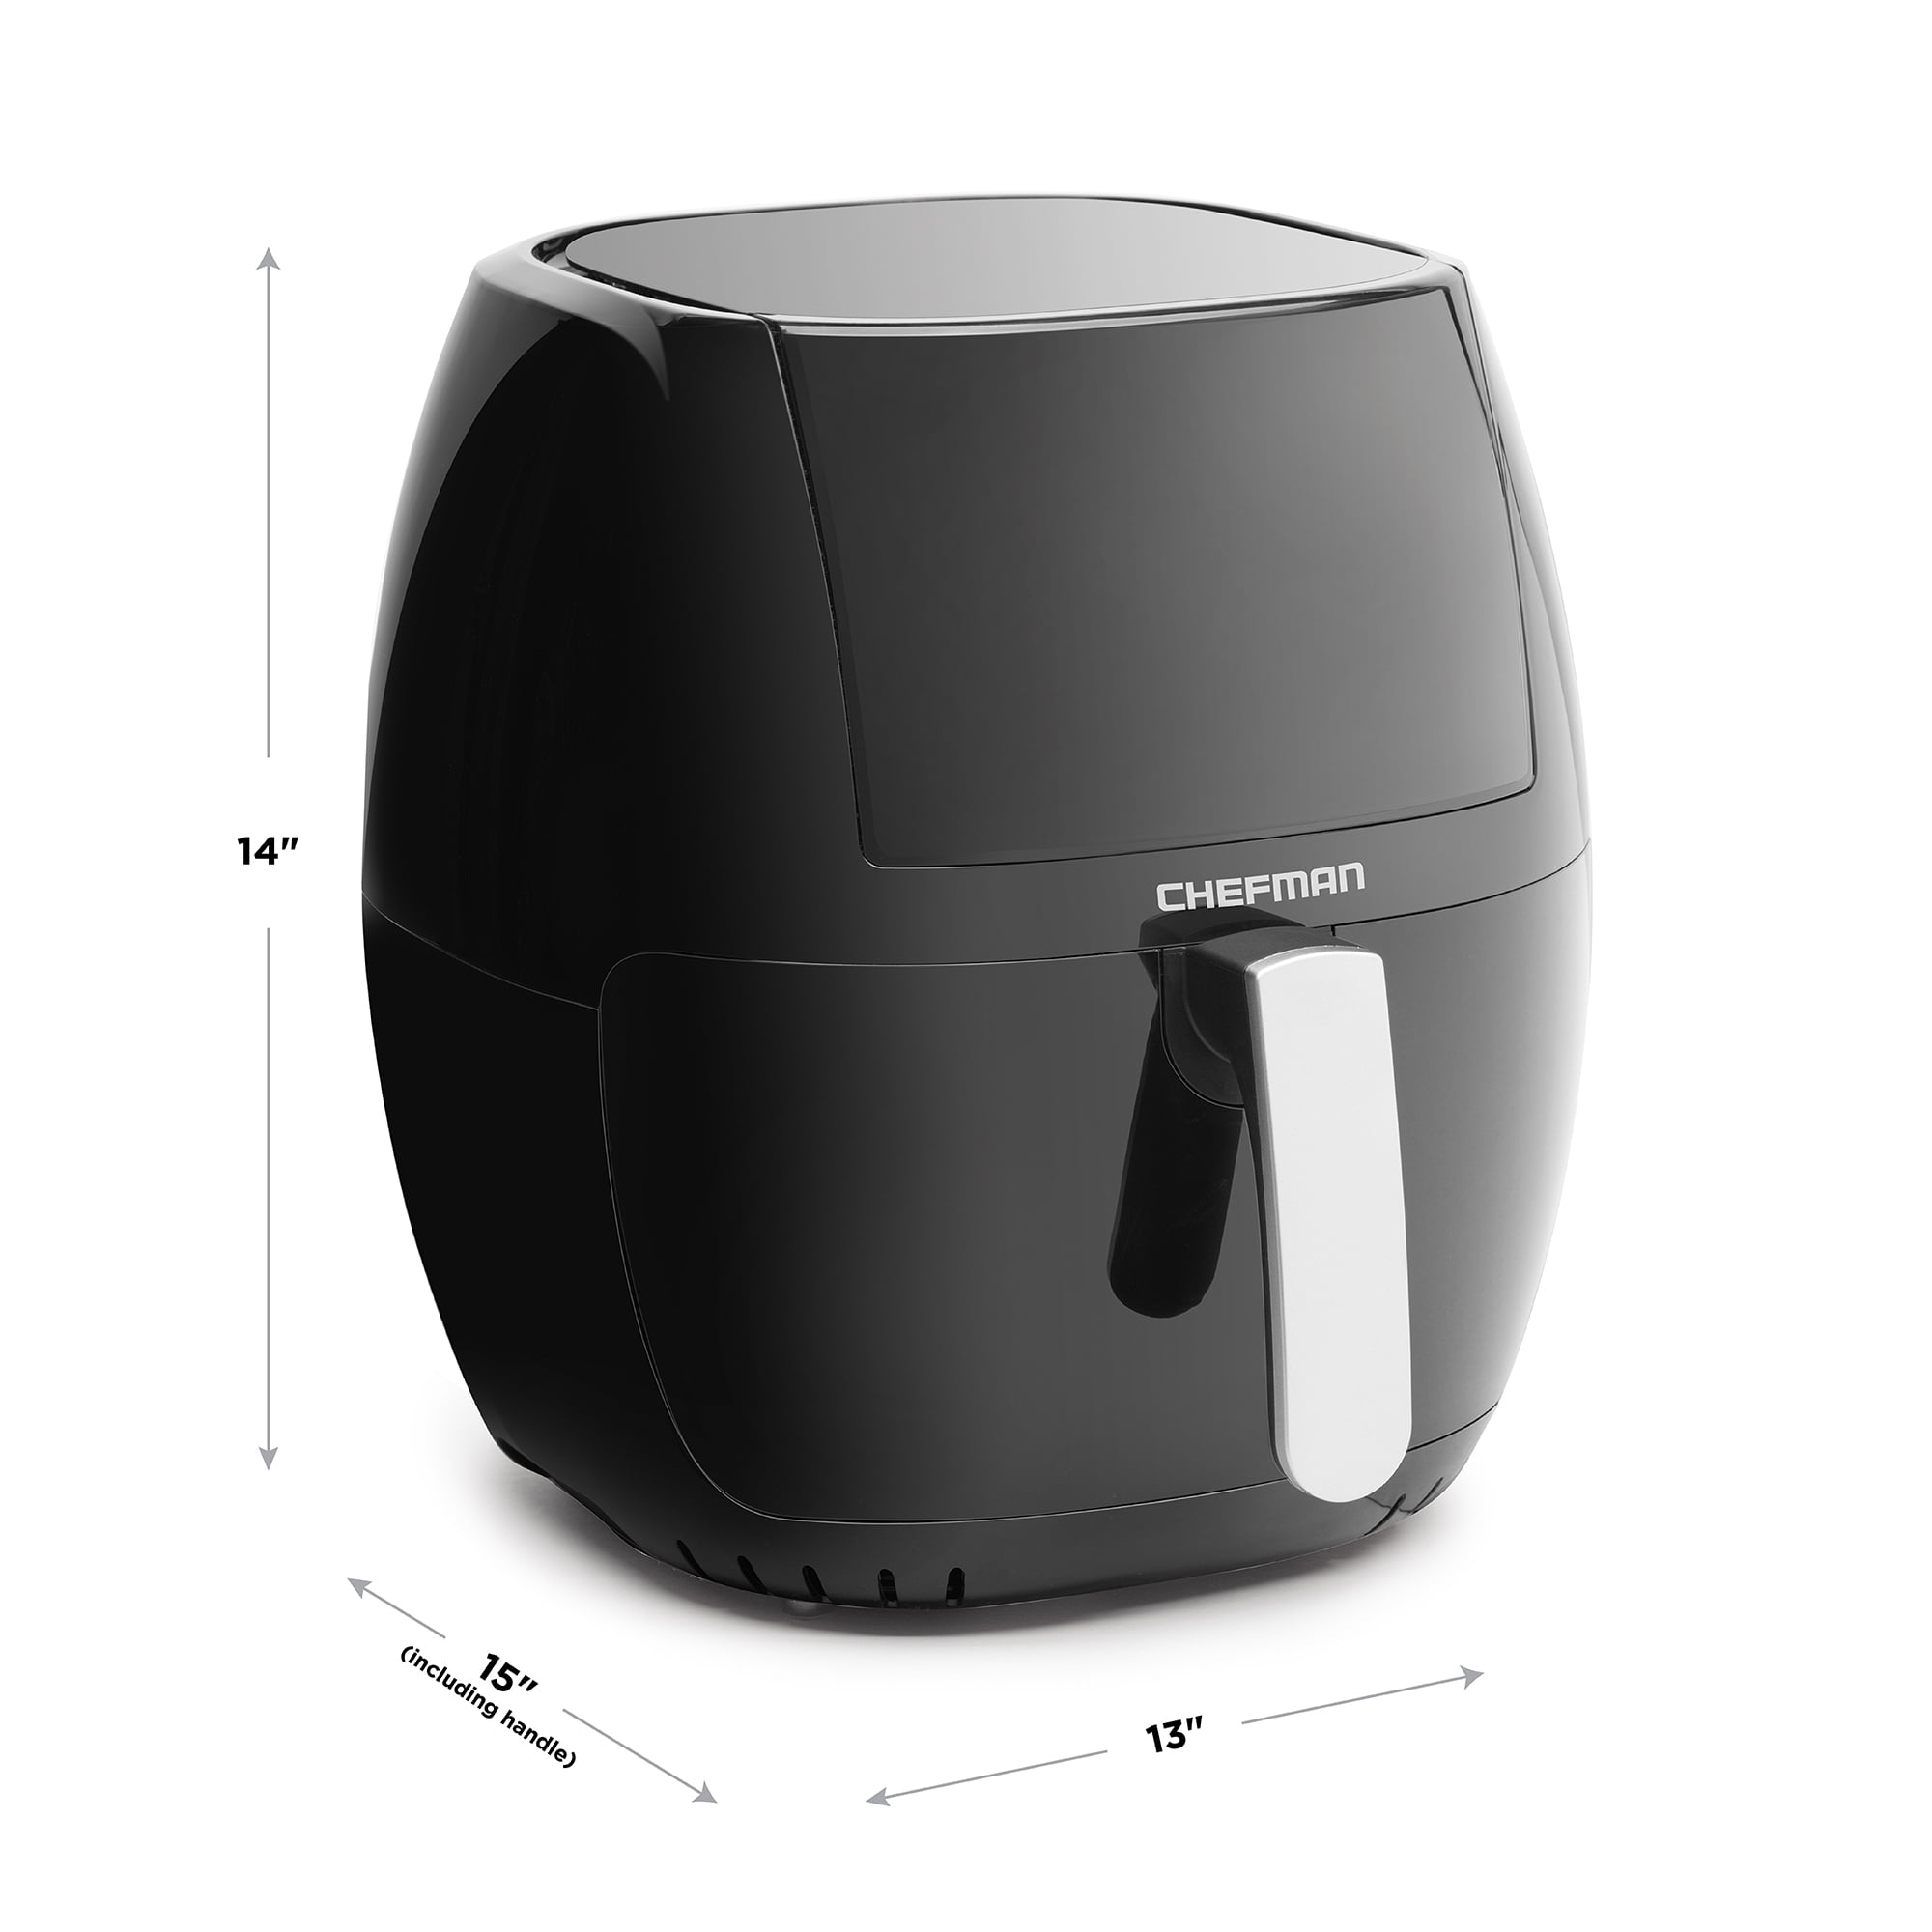 Chefman TurboTouch Easy View Air Fryer, 1500W, 8 qt.